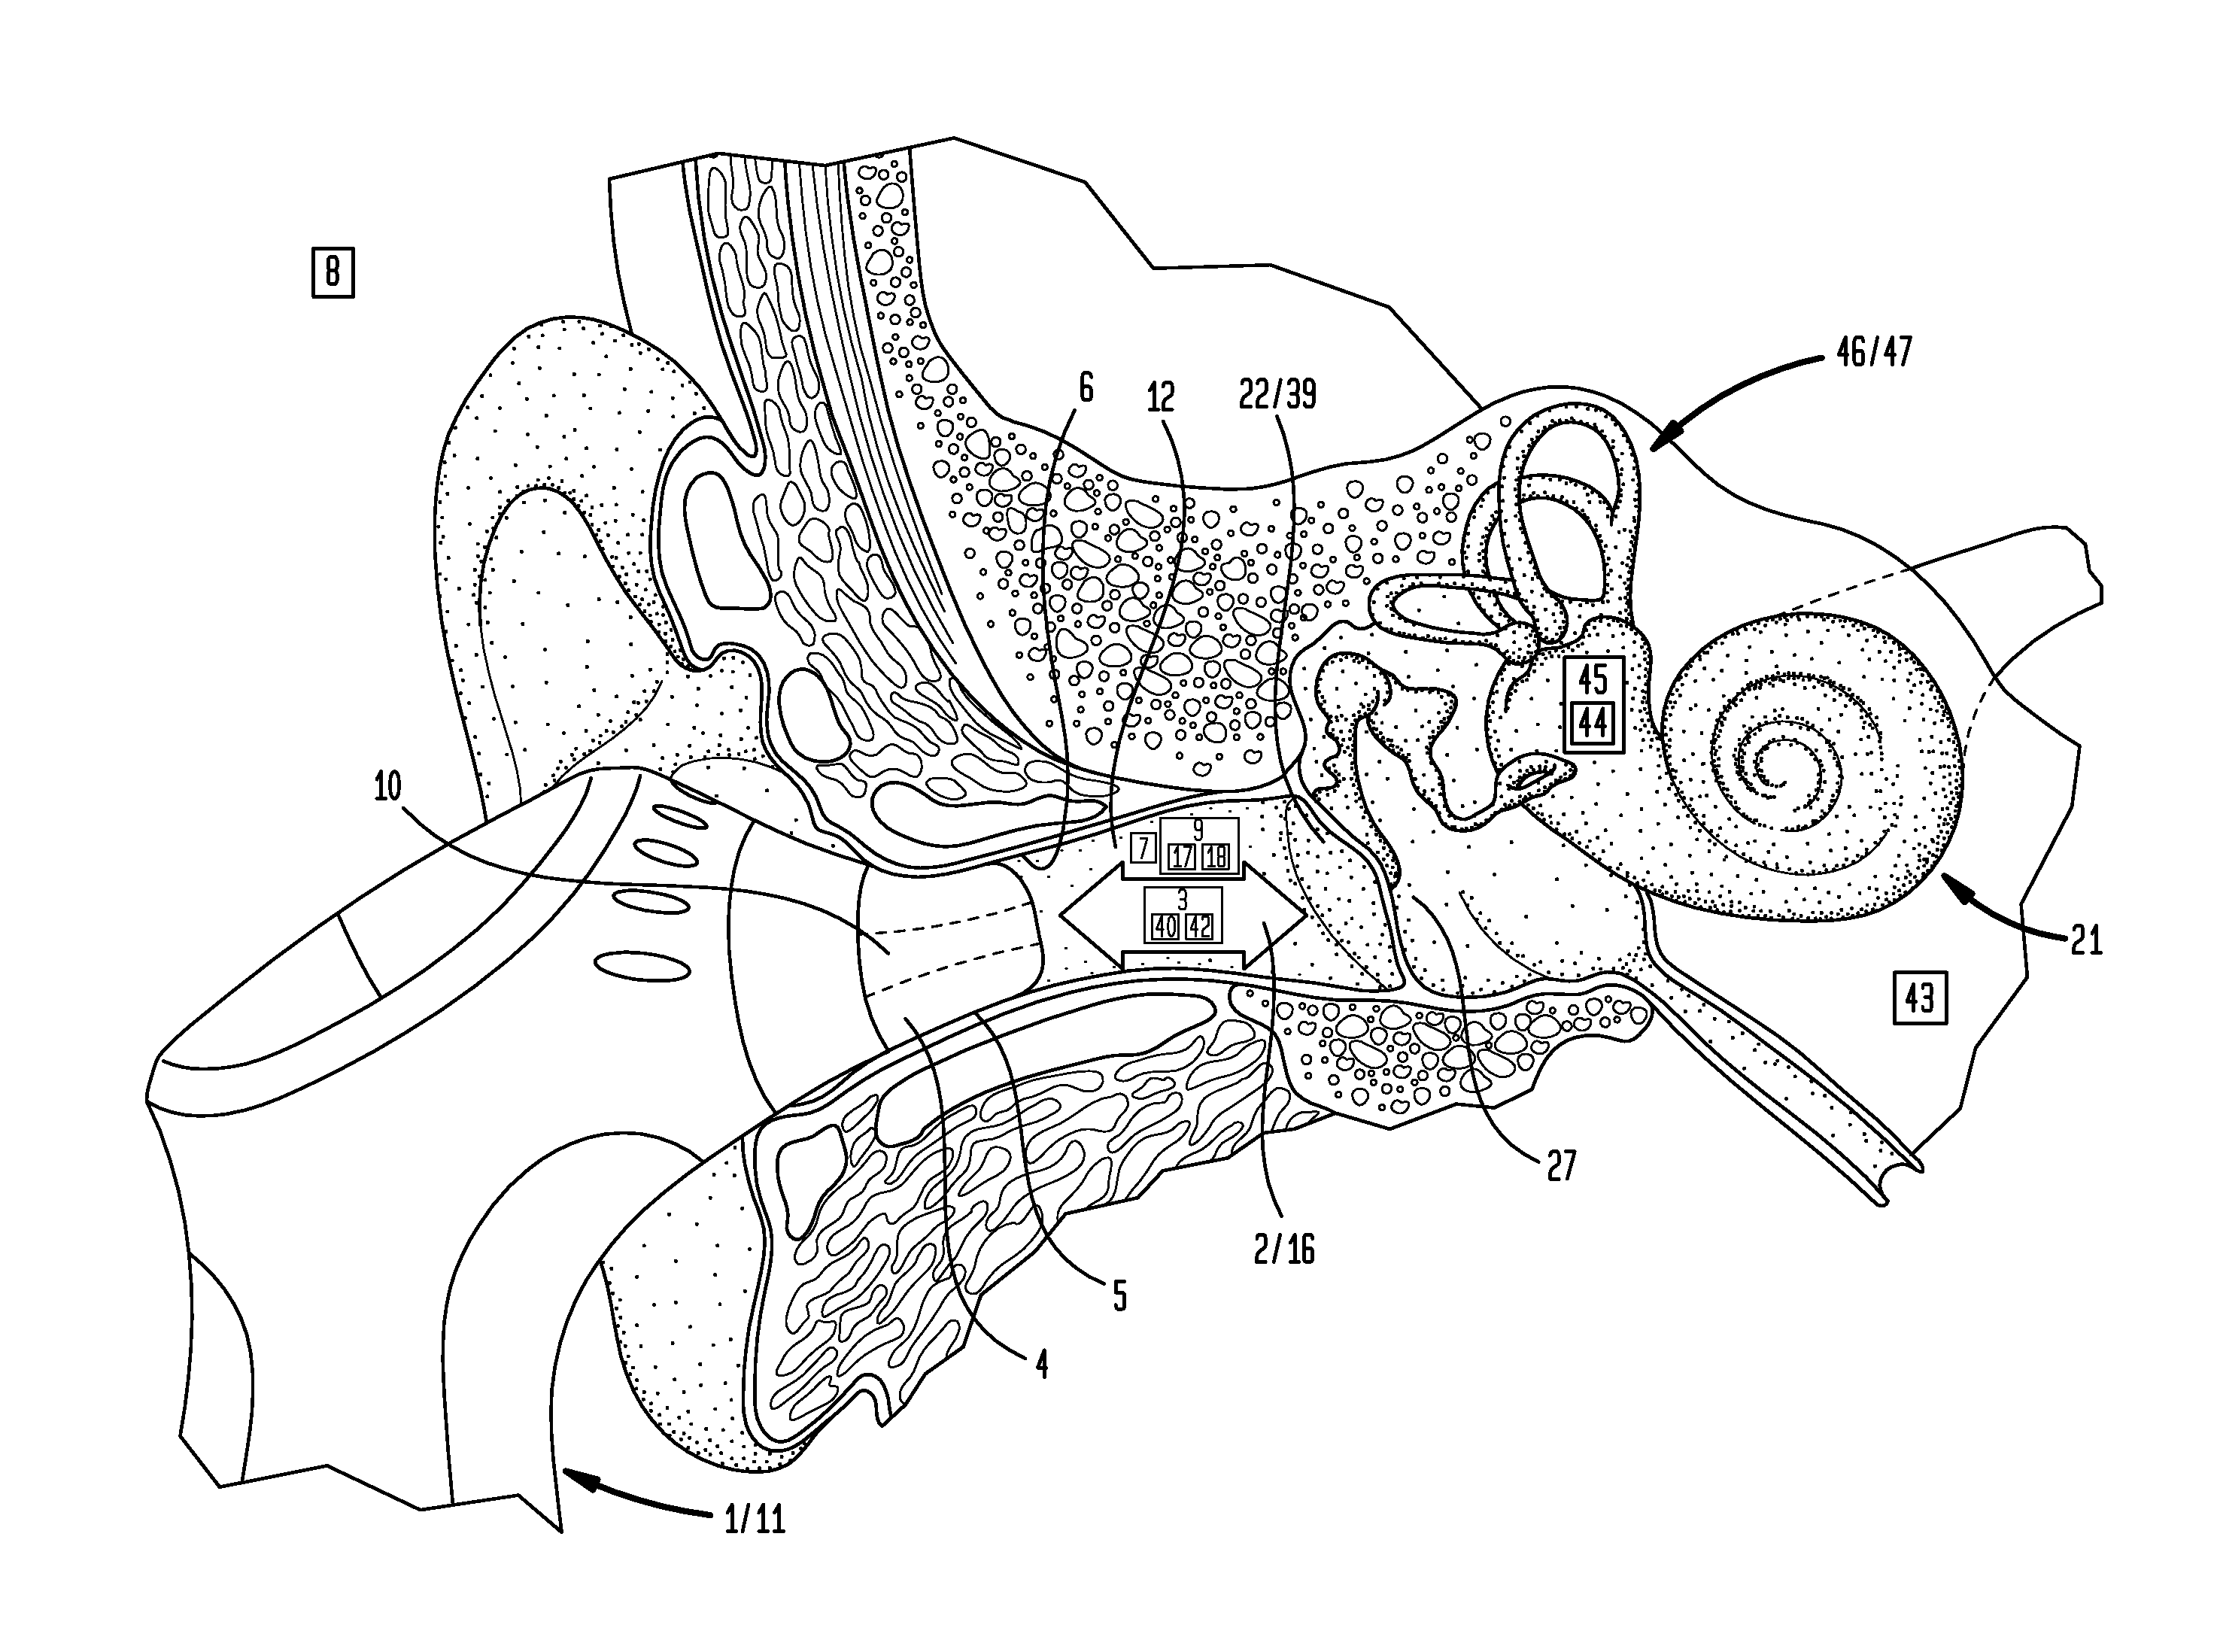 Method For External Ear Canal Pressure Regulation To Alleviate Disorder Symptoms